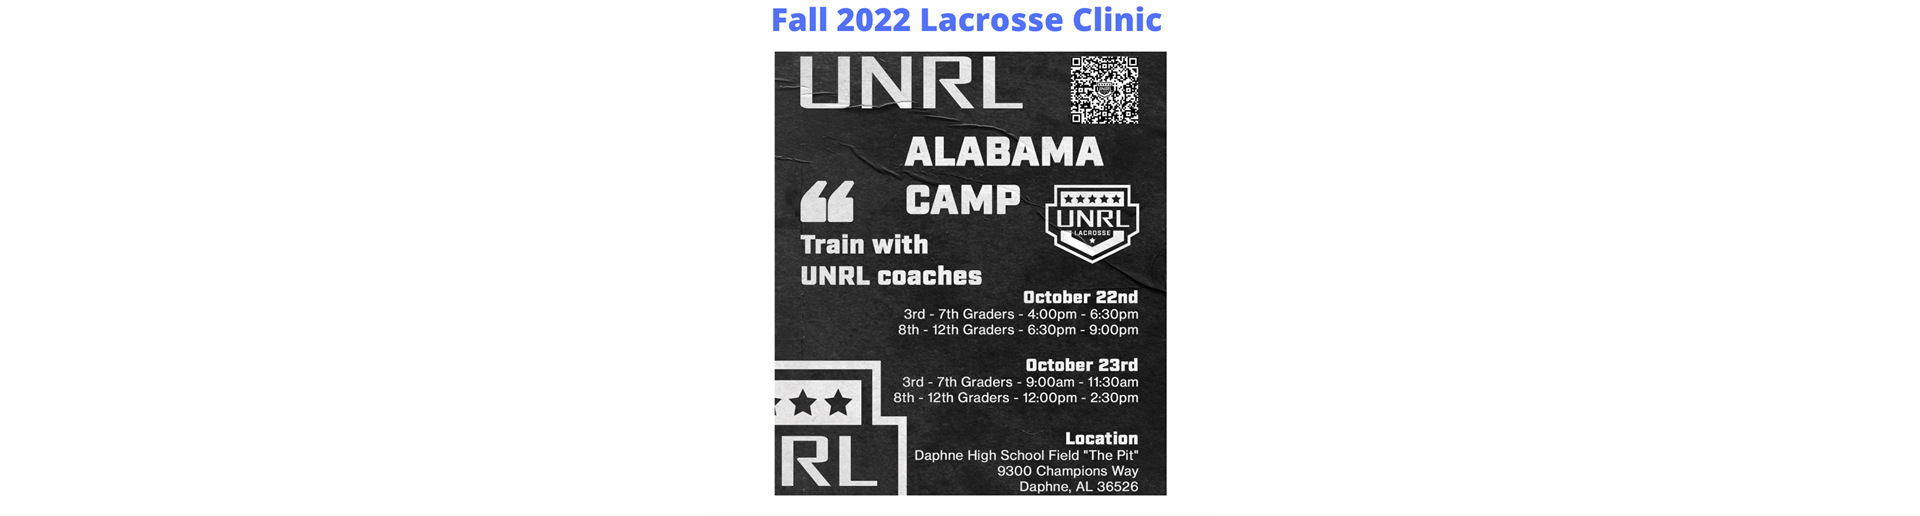 UNRL Fall 2022 Clinic